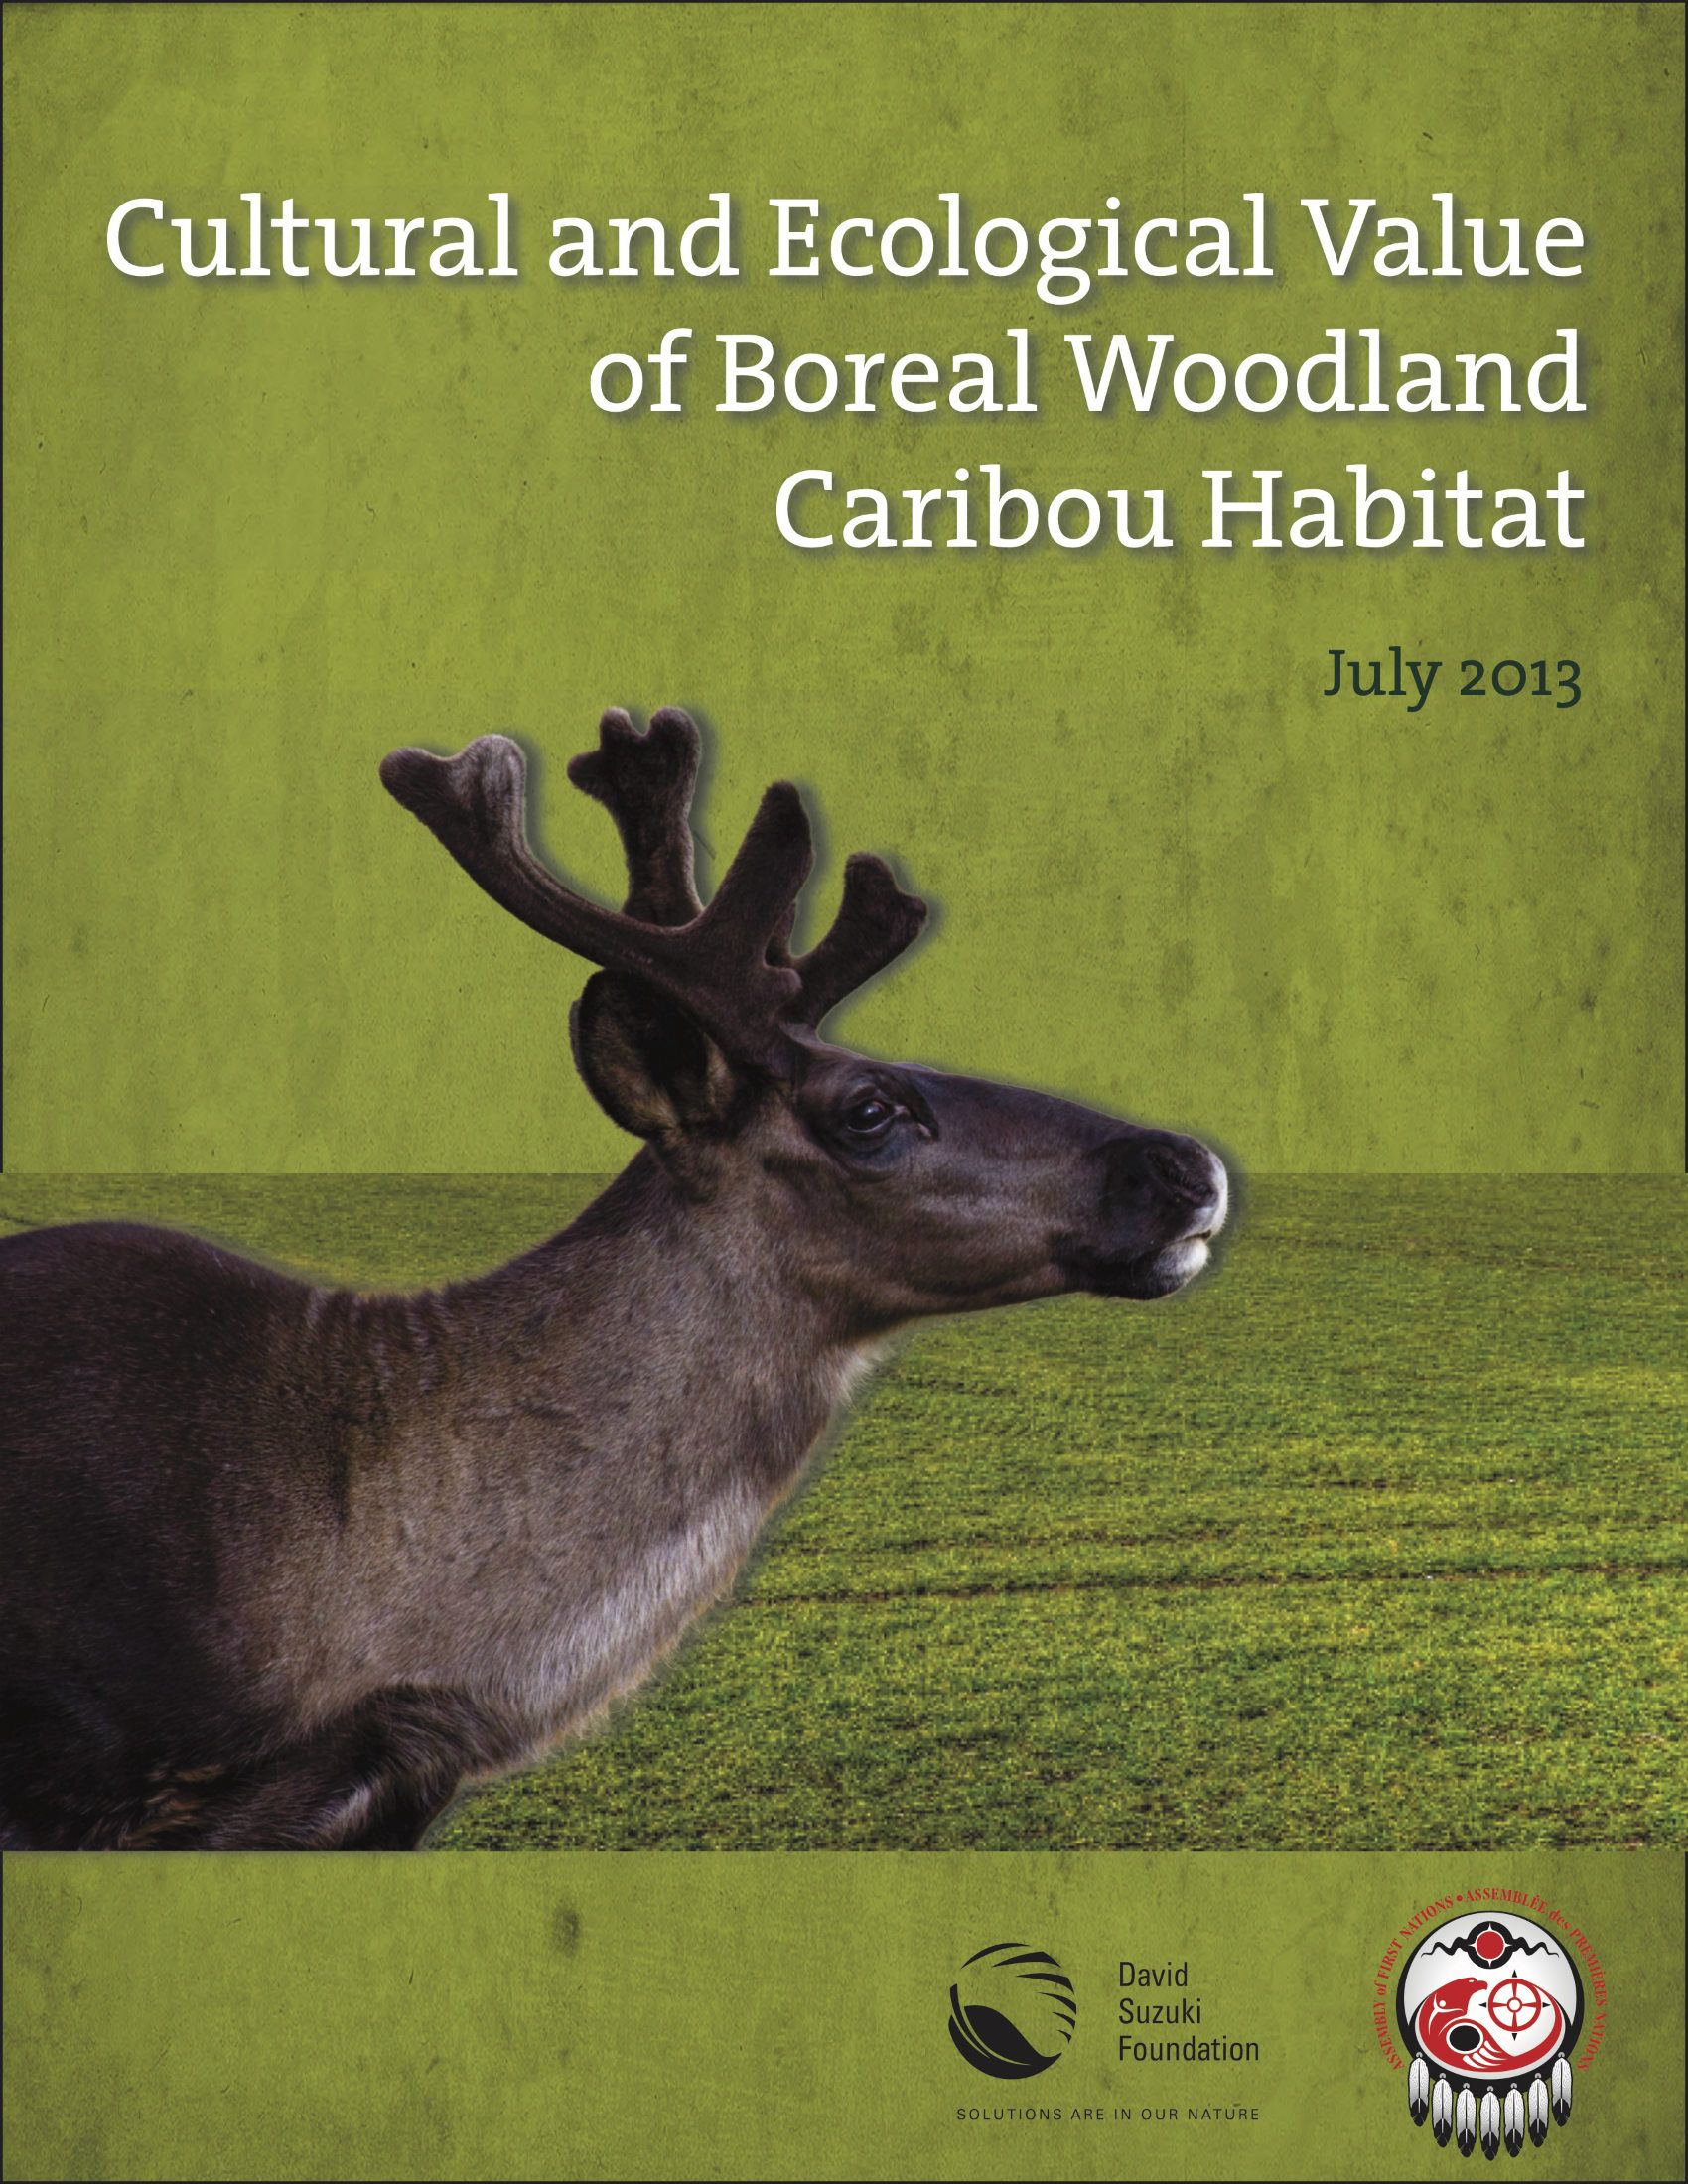 Cultural and Ecological Value of Boreal Woodland Caribou Habitat